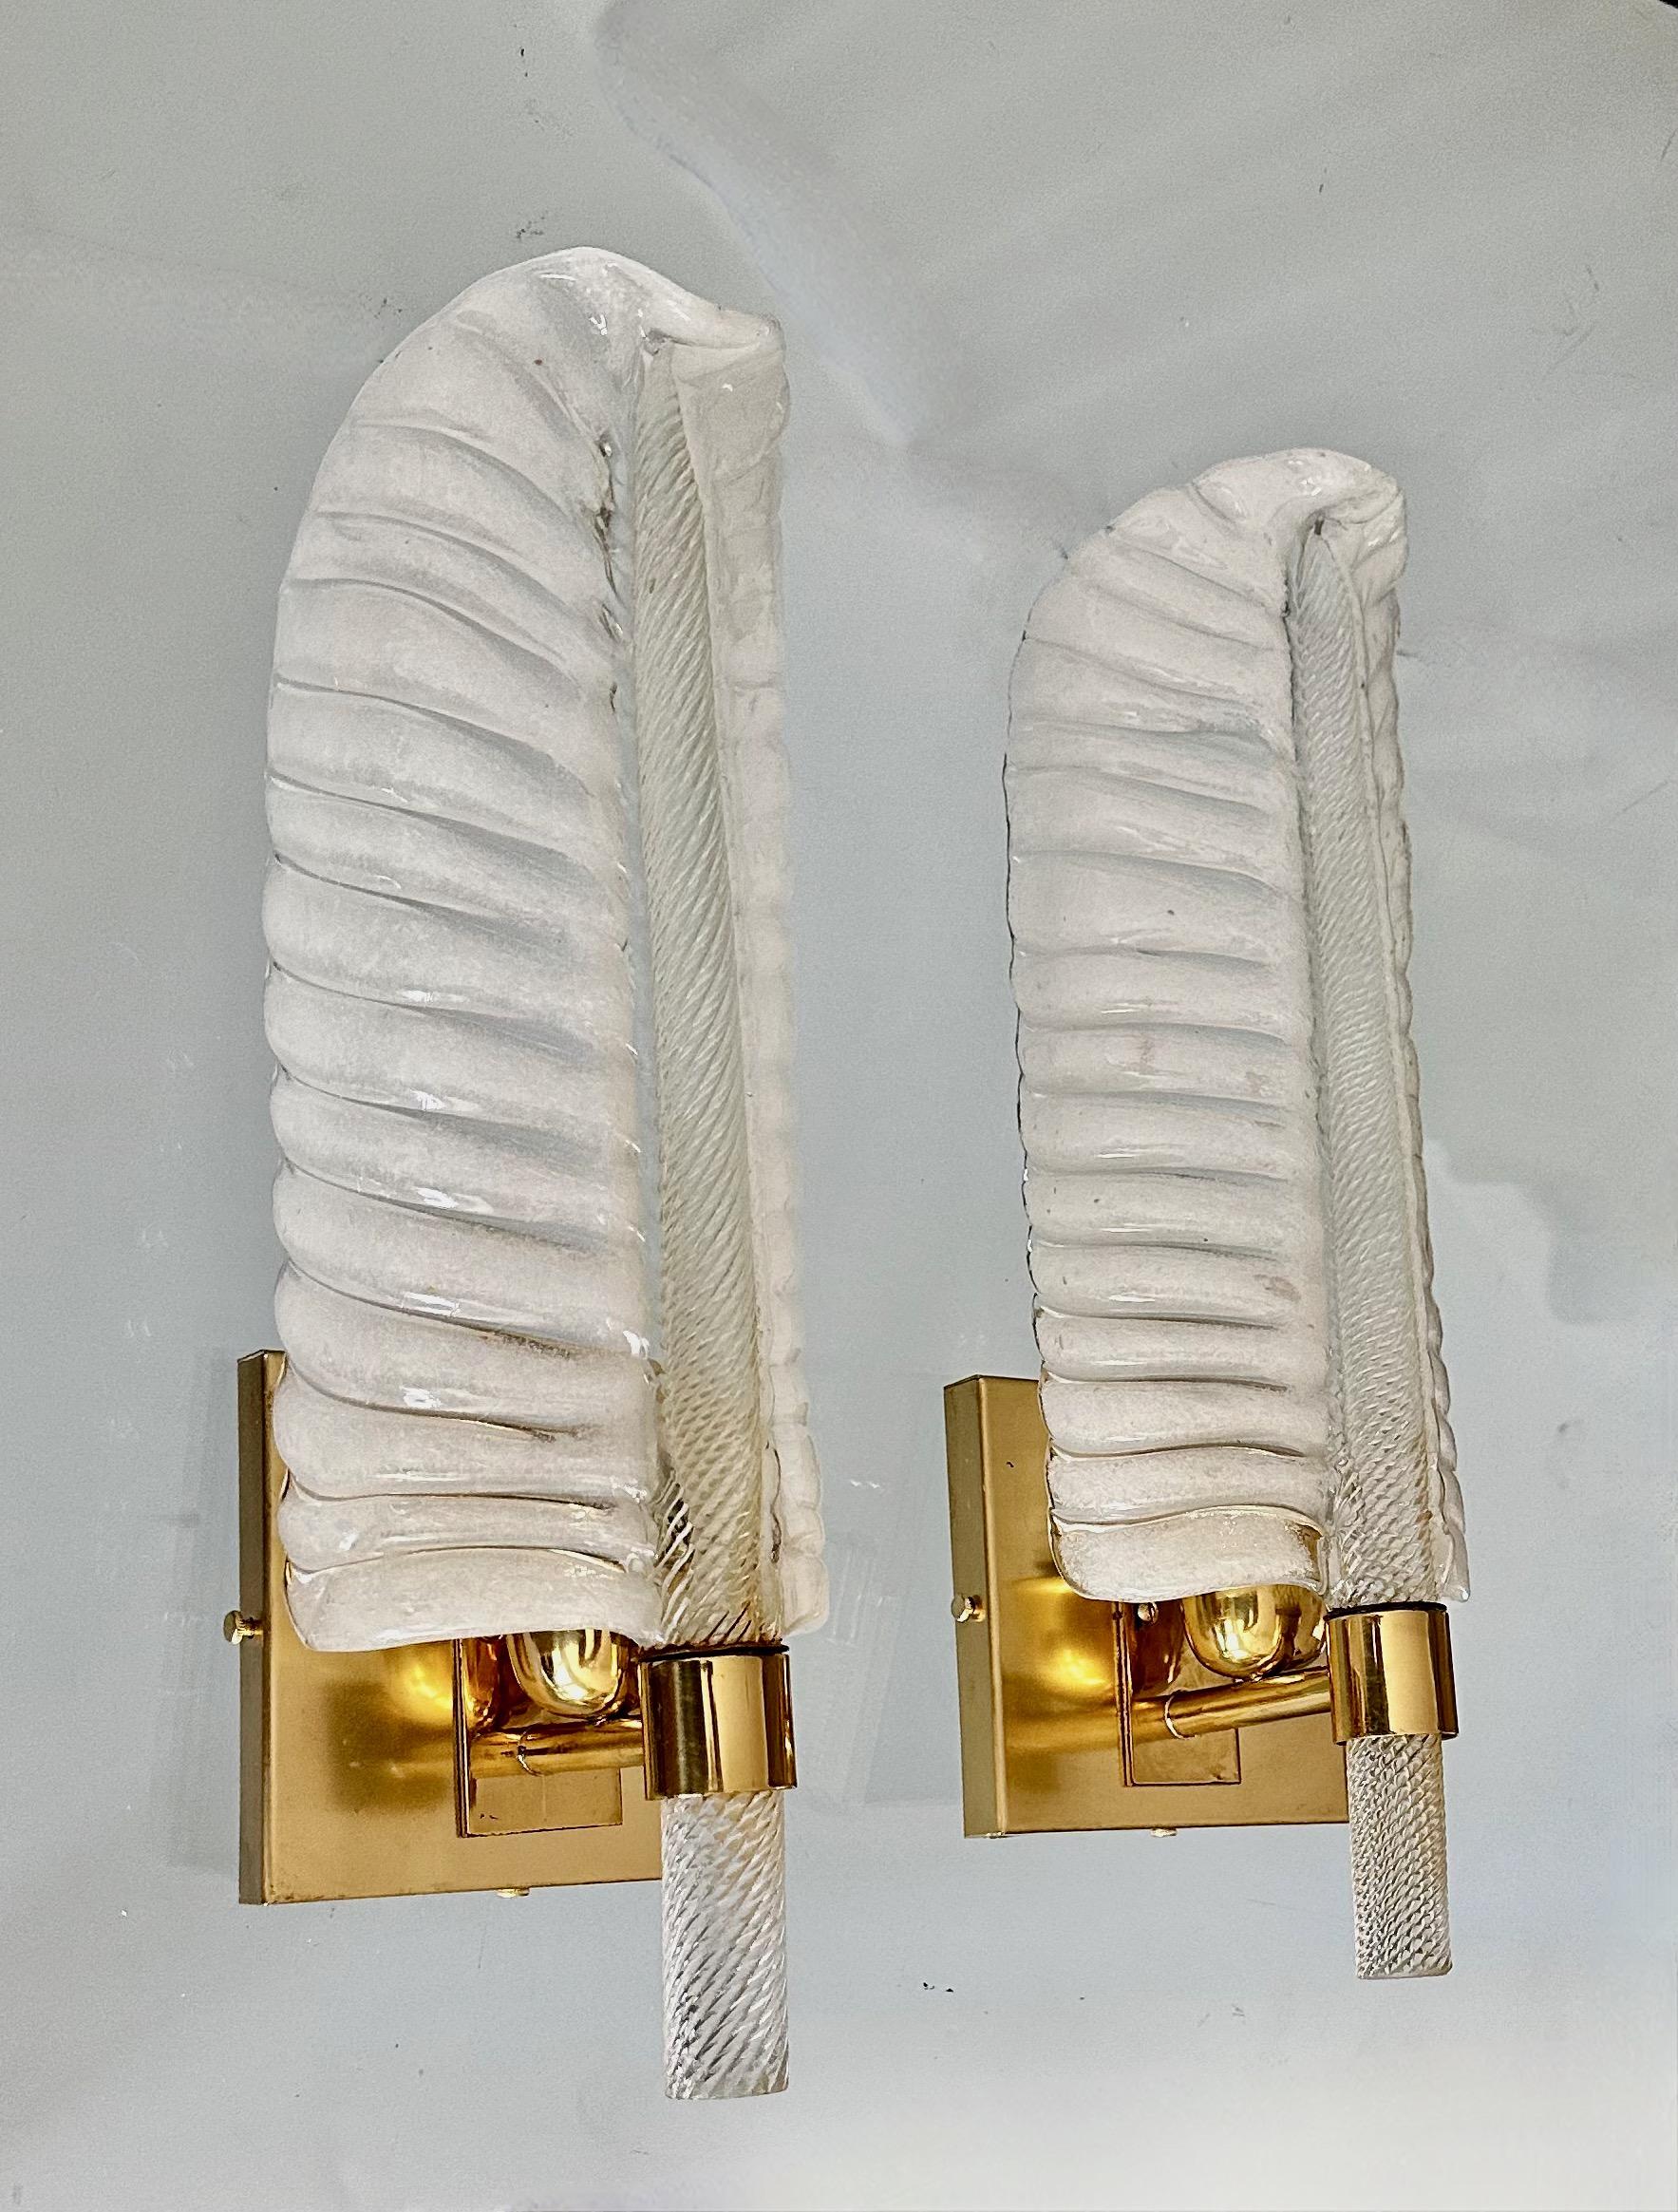 Barovier handblown Murano glass leaf or plume shaped wall sconces. The glass is carefully crafted using the 